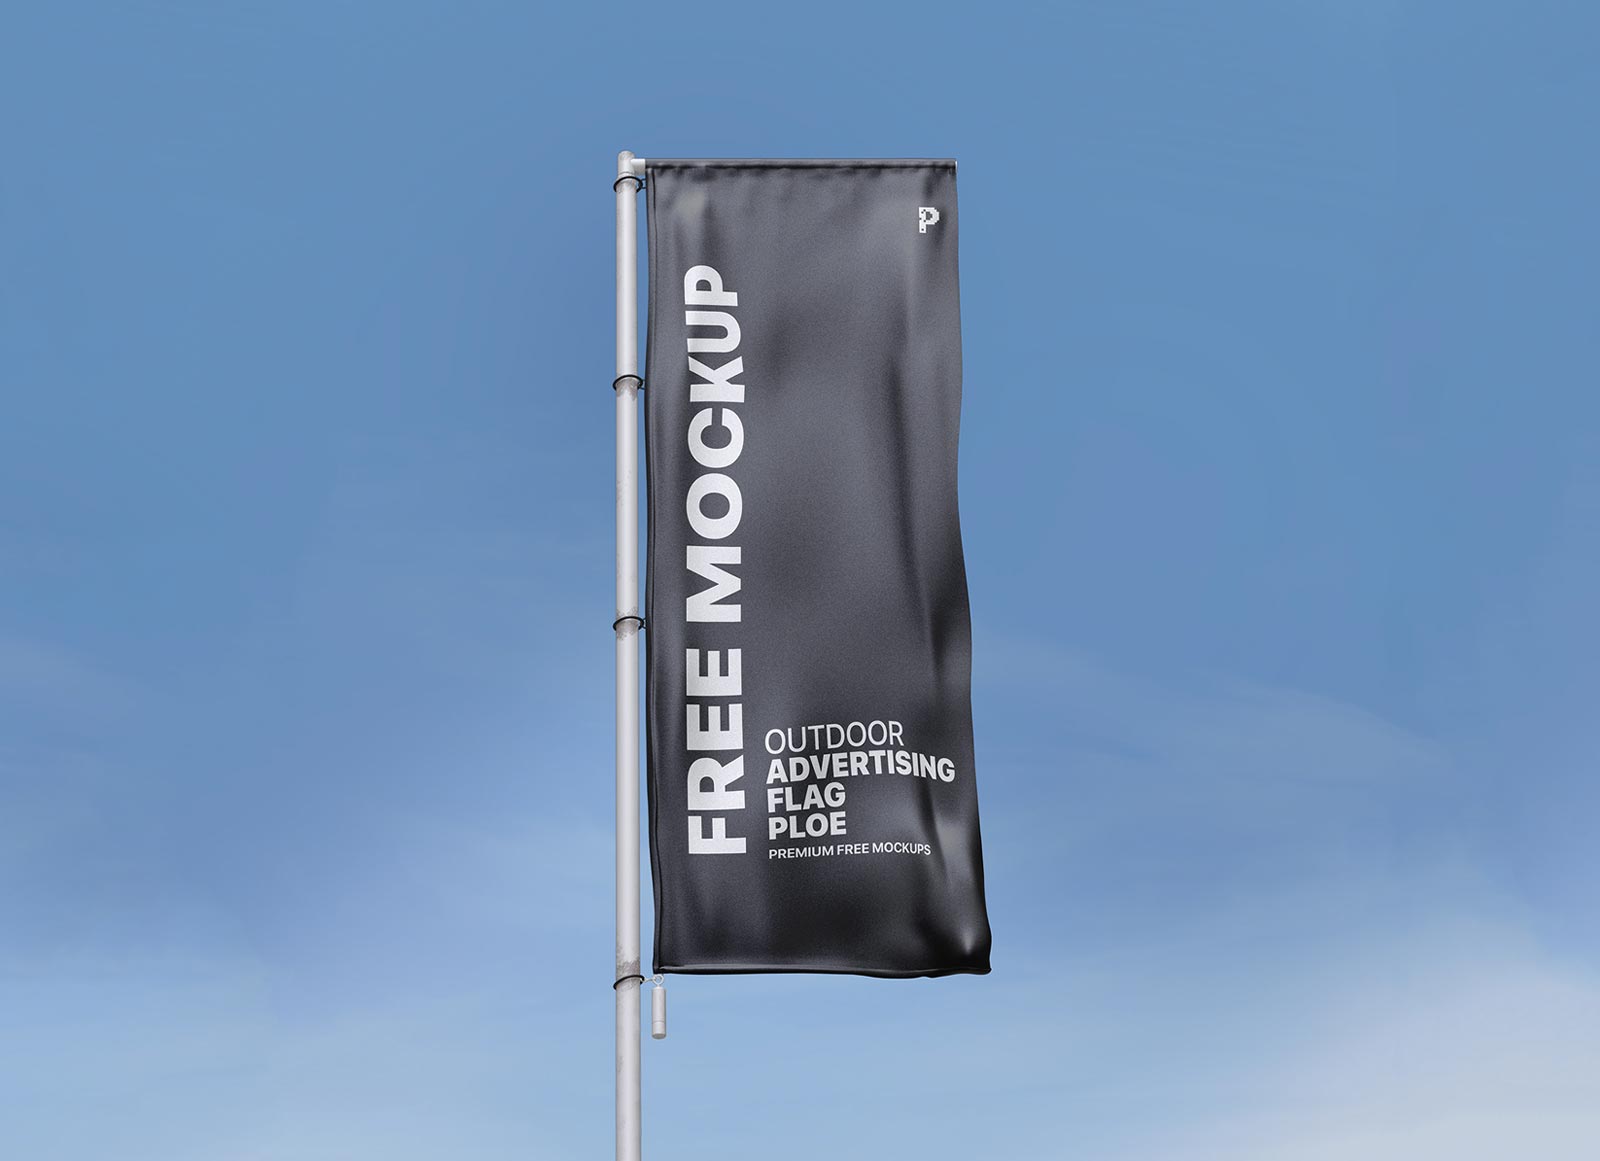 Outdoor Advertising Street Flagge Pole Banner Mockup